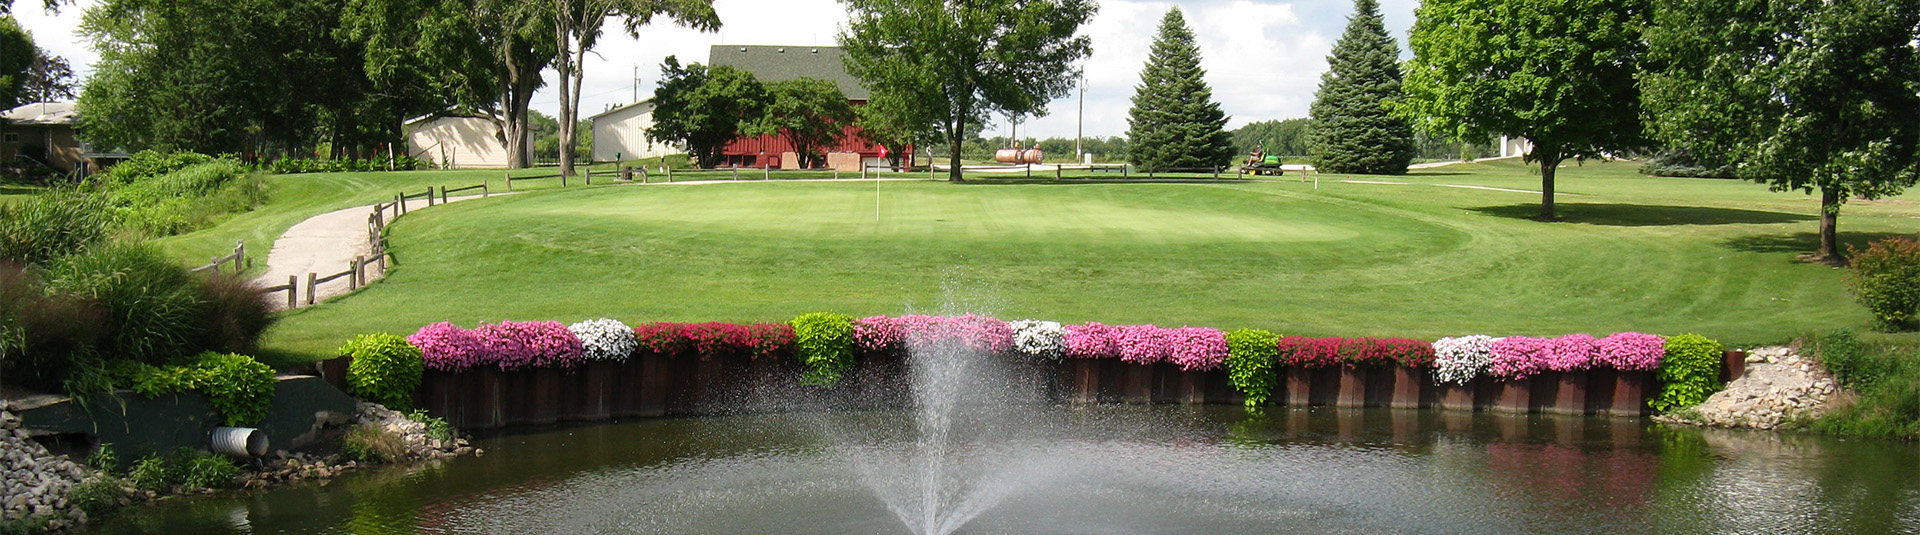 pond with flowers on golf course